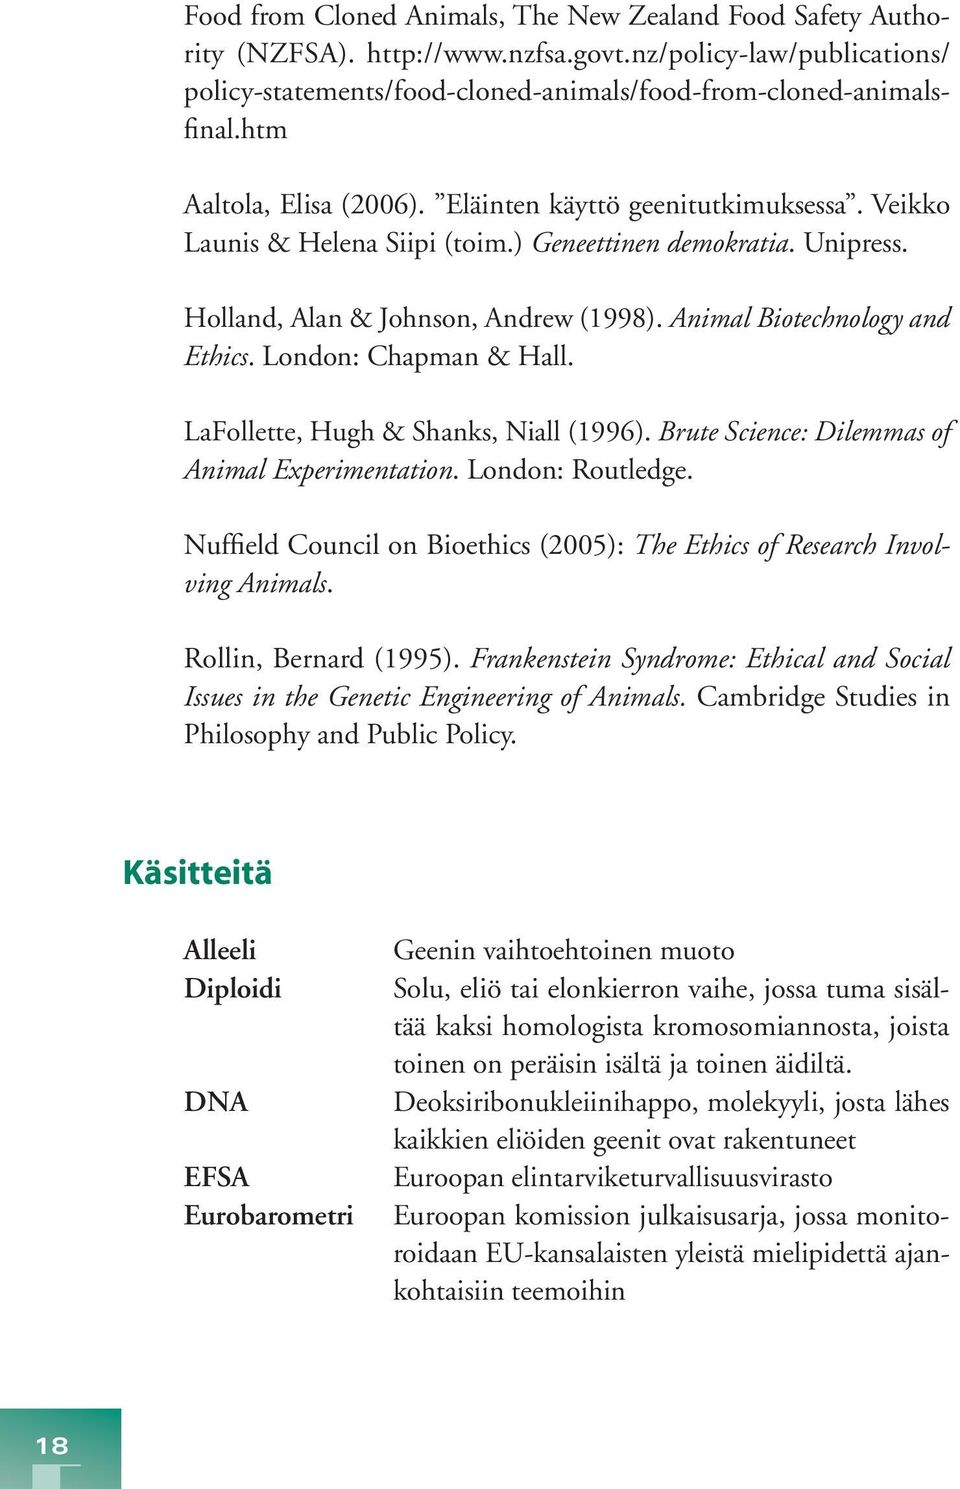 Animal Biotechnology and Ethics. London: Chapman & Hall. LaFollette, Hugh & Shanks, Niall (1996). Brute Science: Dilemmas of Animal Experimentation. London: Routledge.